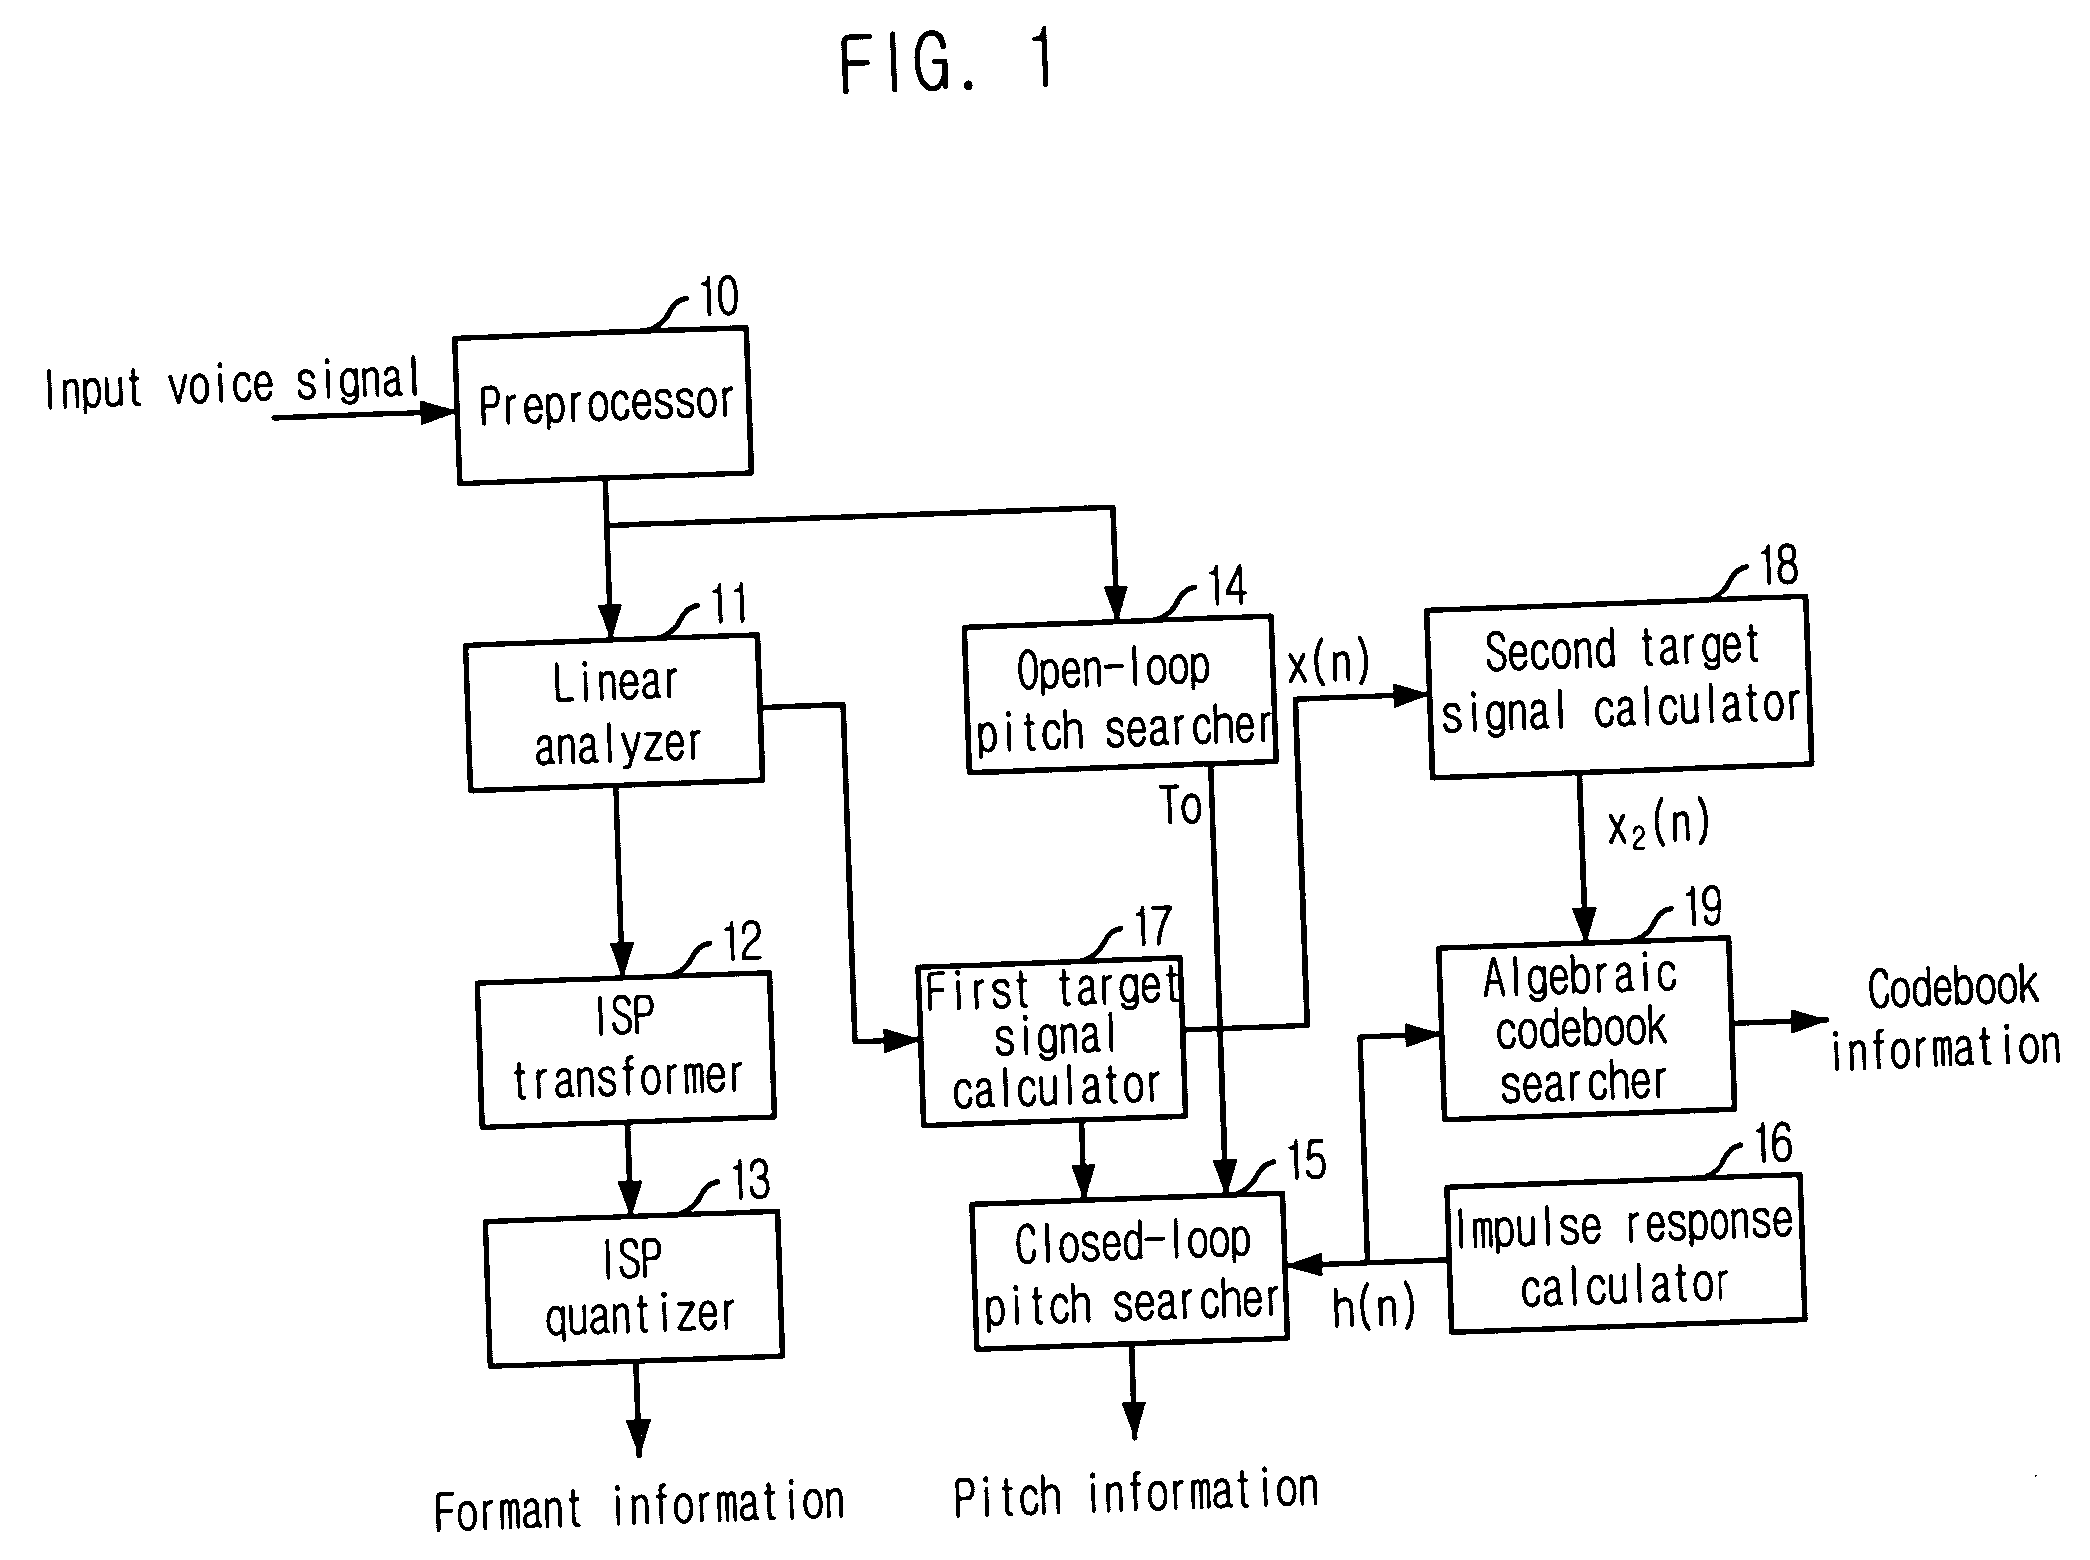 Method for flexible bit rate code vector generation and wideband vocoder employing the same